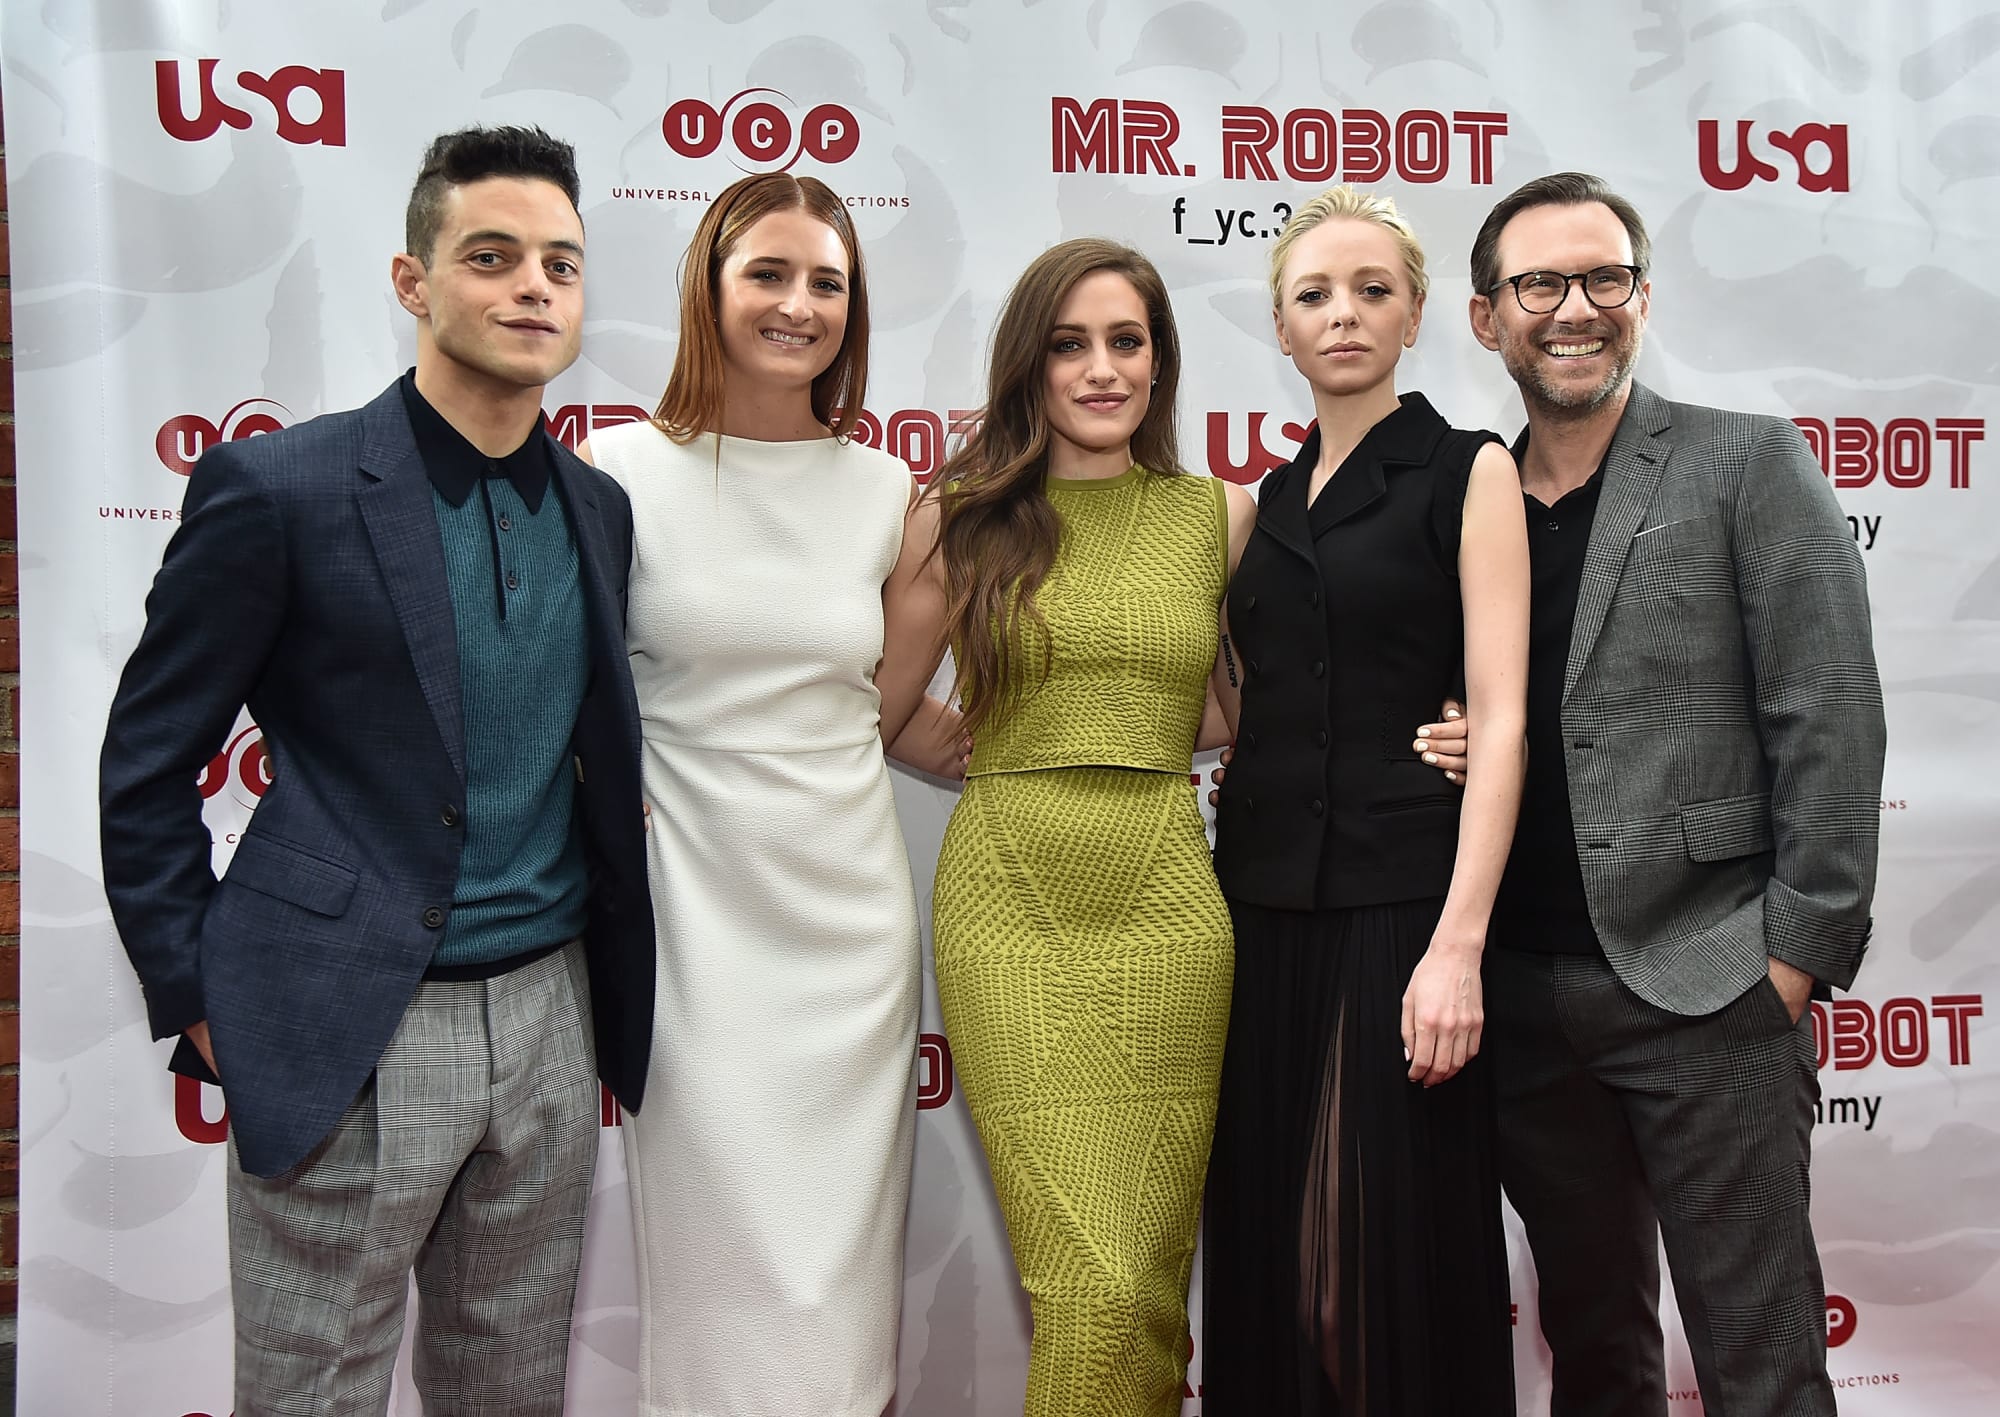 Mr. Robot season is coming to Amazon Video in July